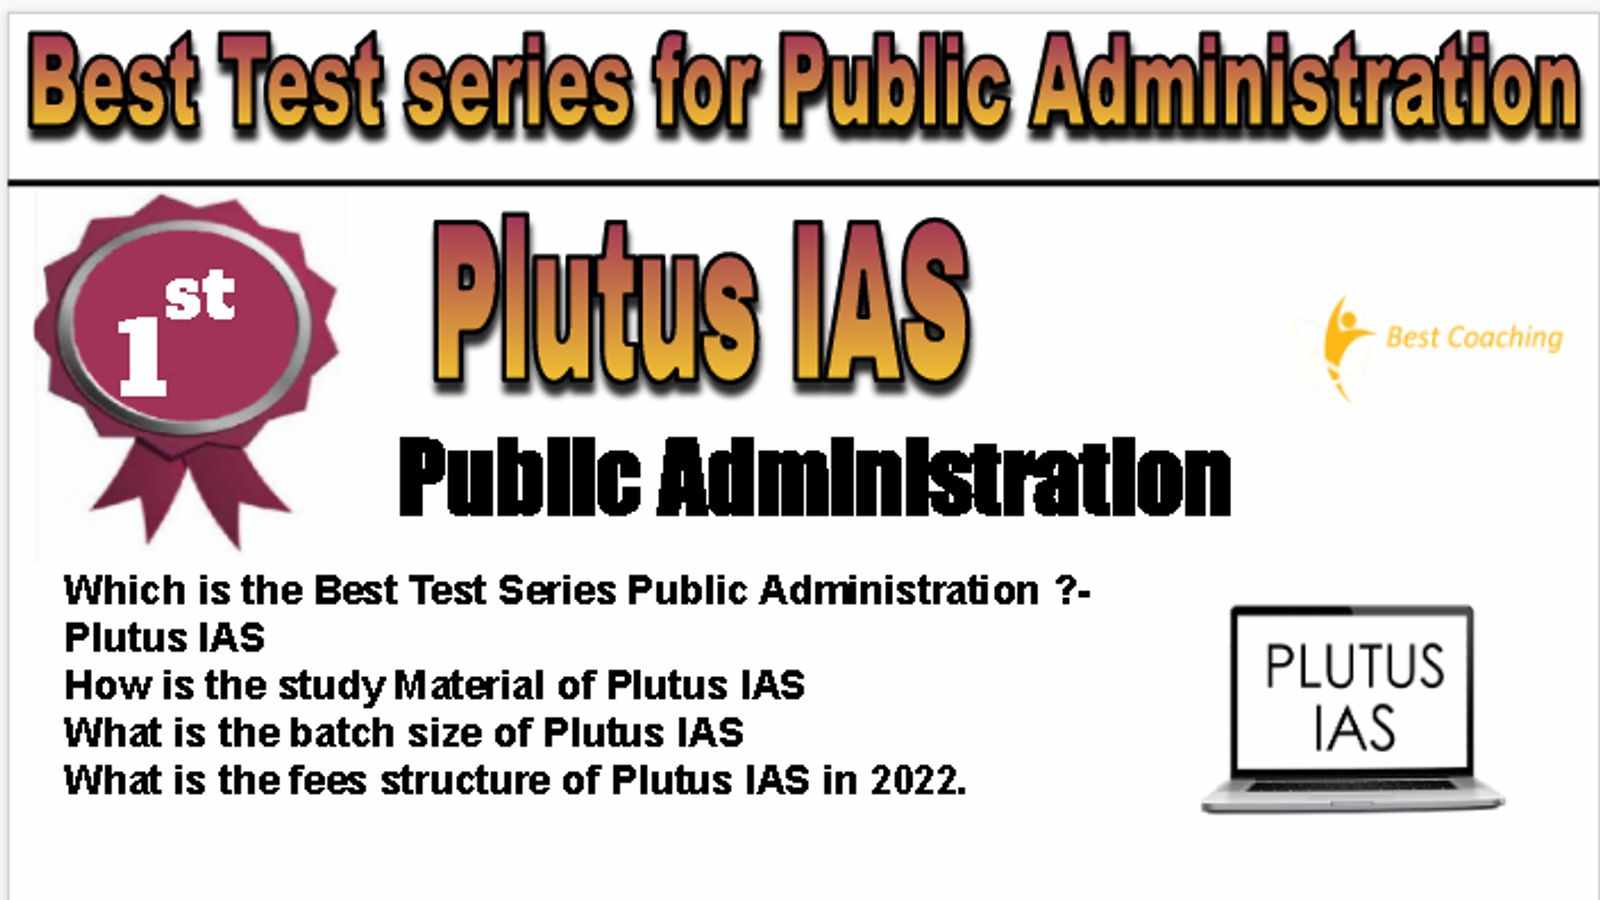 Rank 1 Best Test series for Public Administration